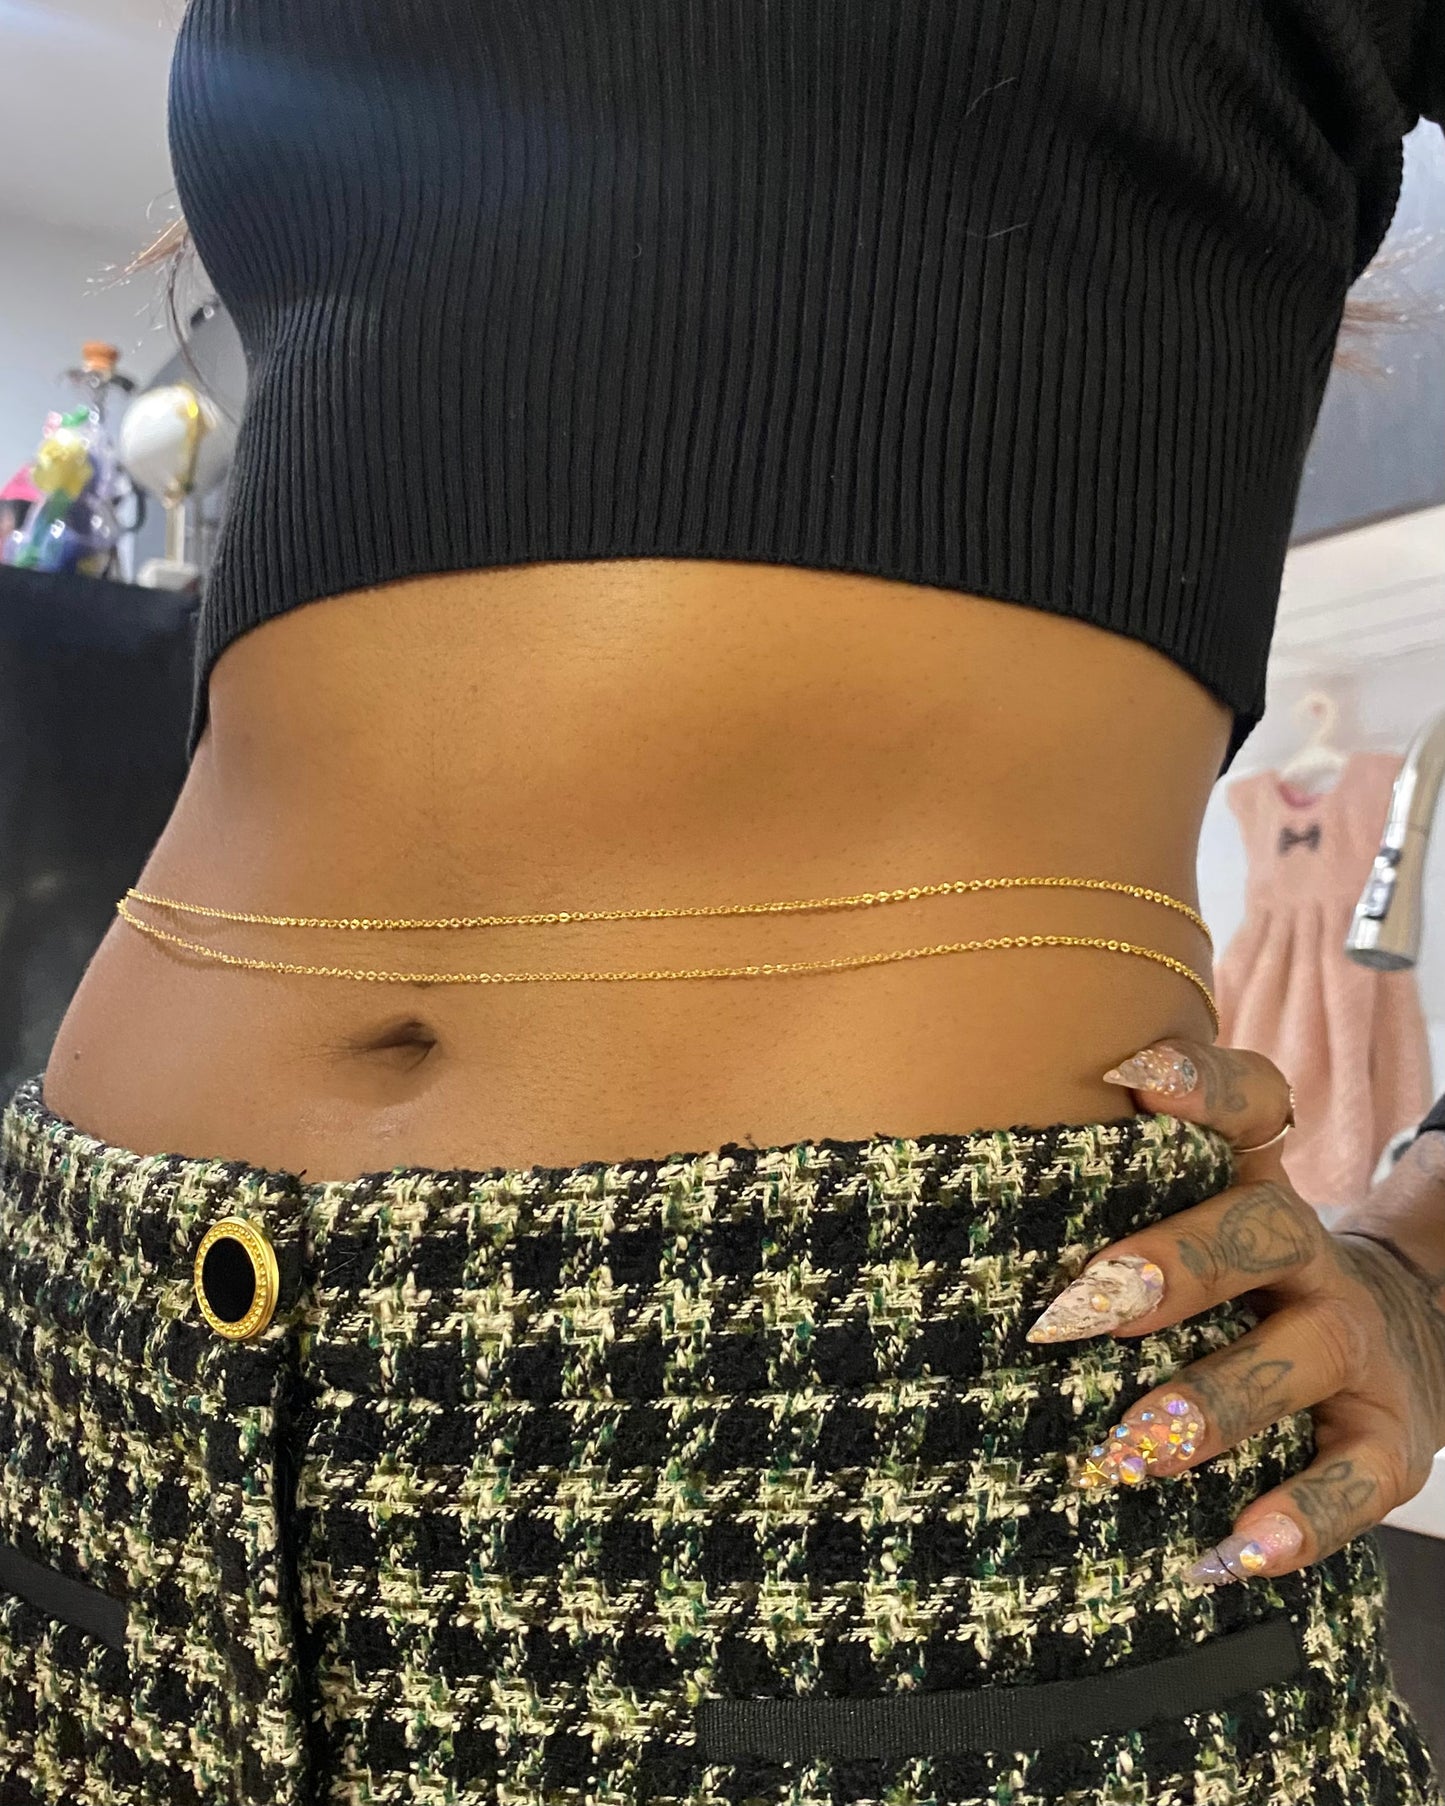 “The Score” Double Stranded Belly Chain